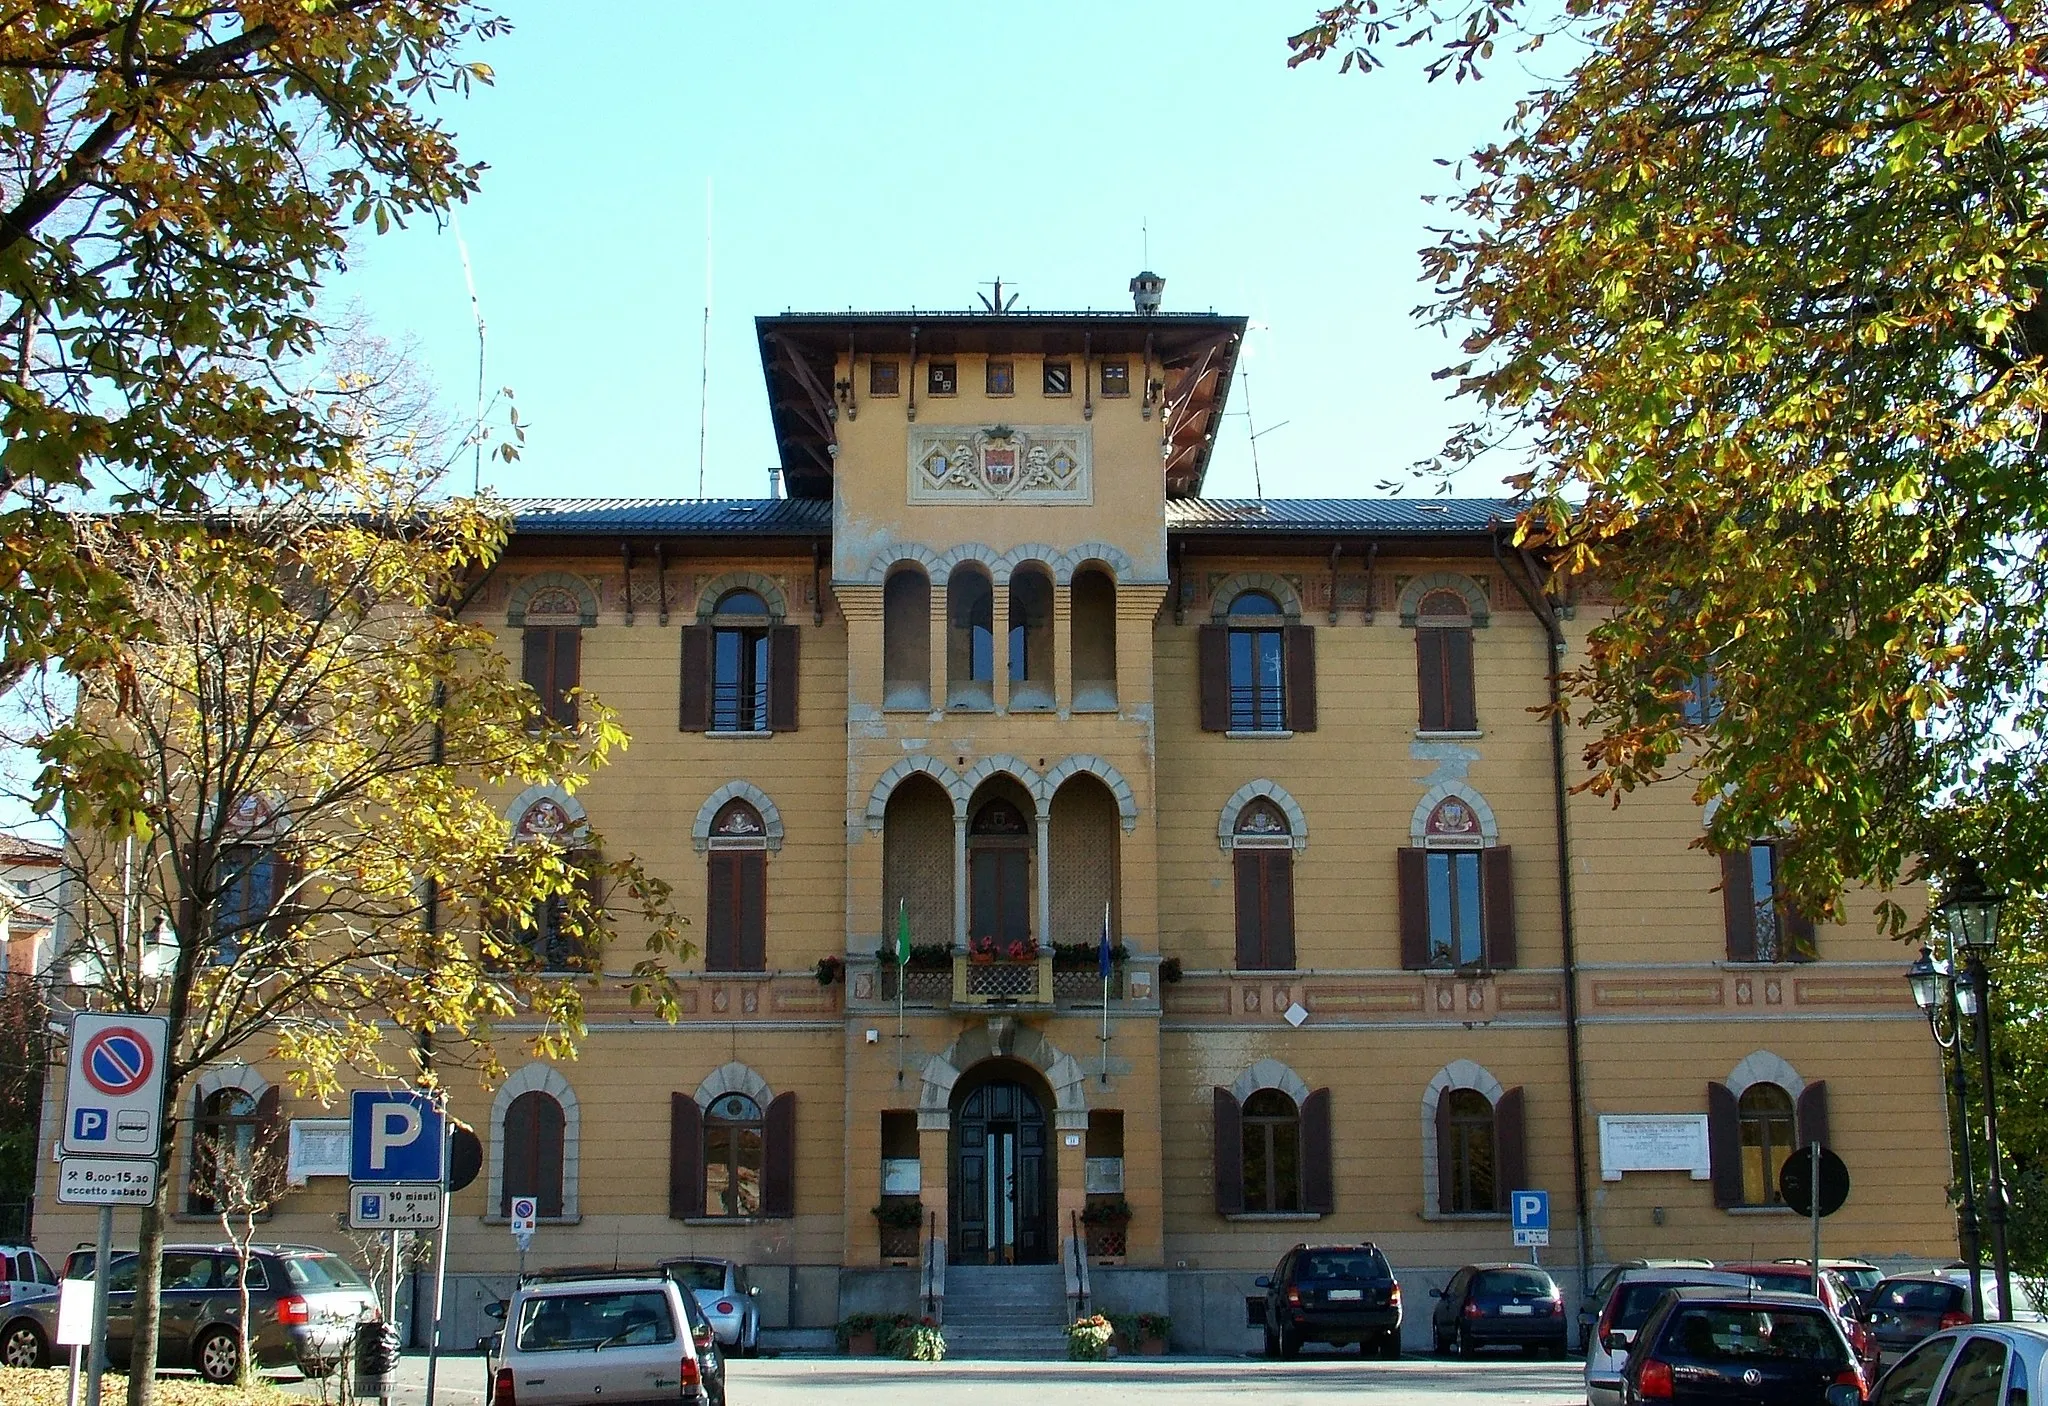 Photo showing: Italy, province of Parma, municipality of Fornovo di Taro, the Town Hall.